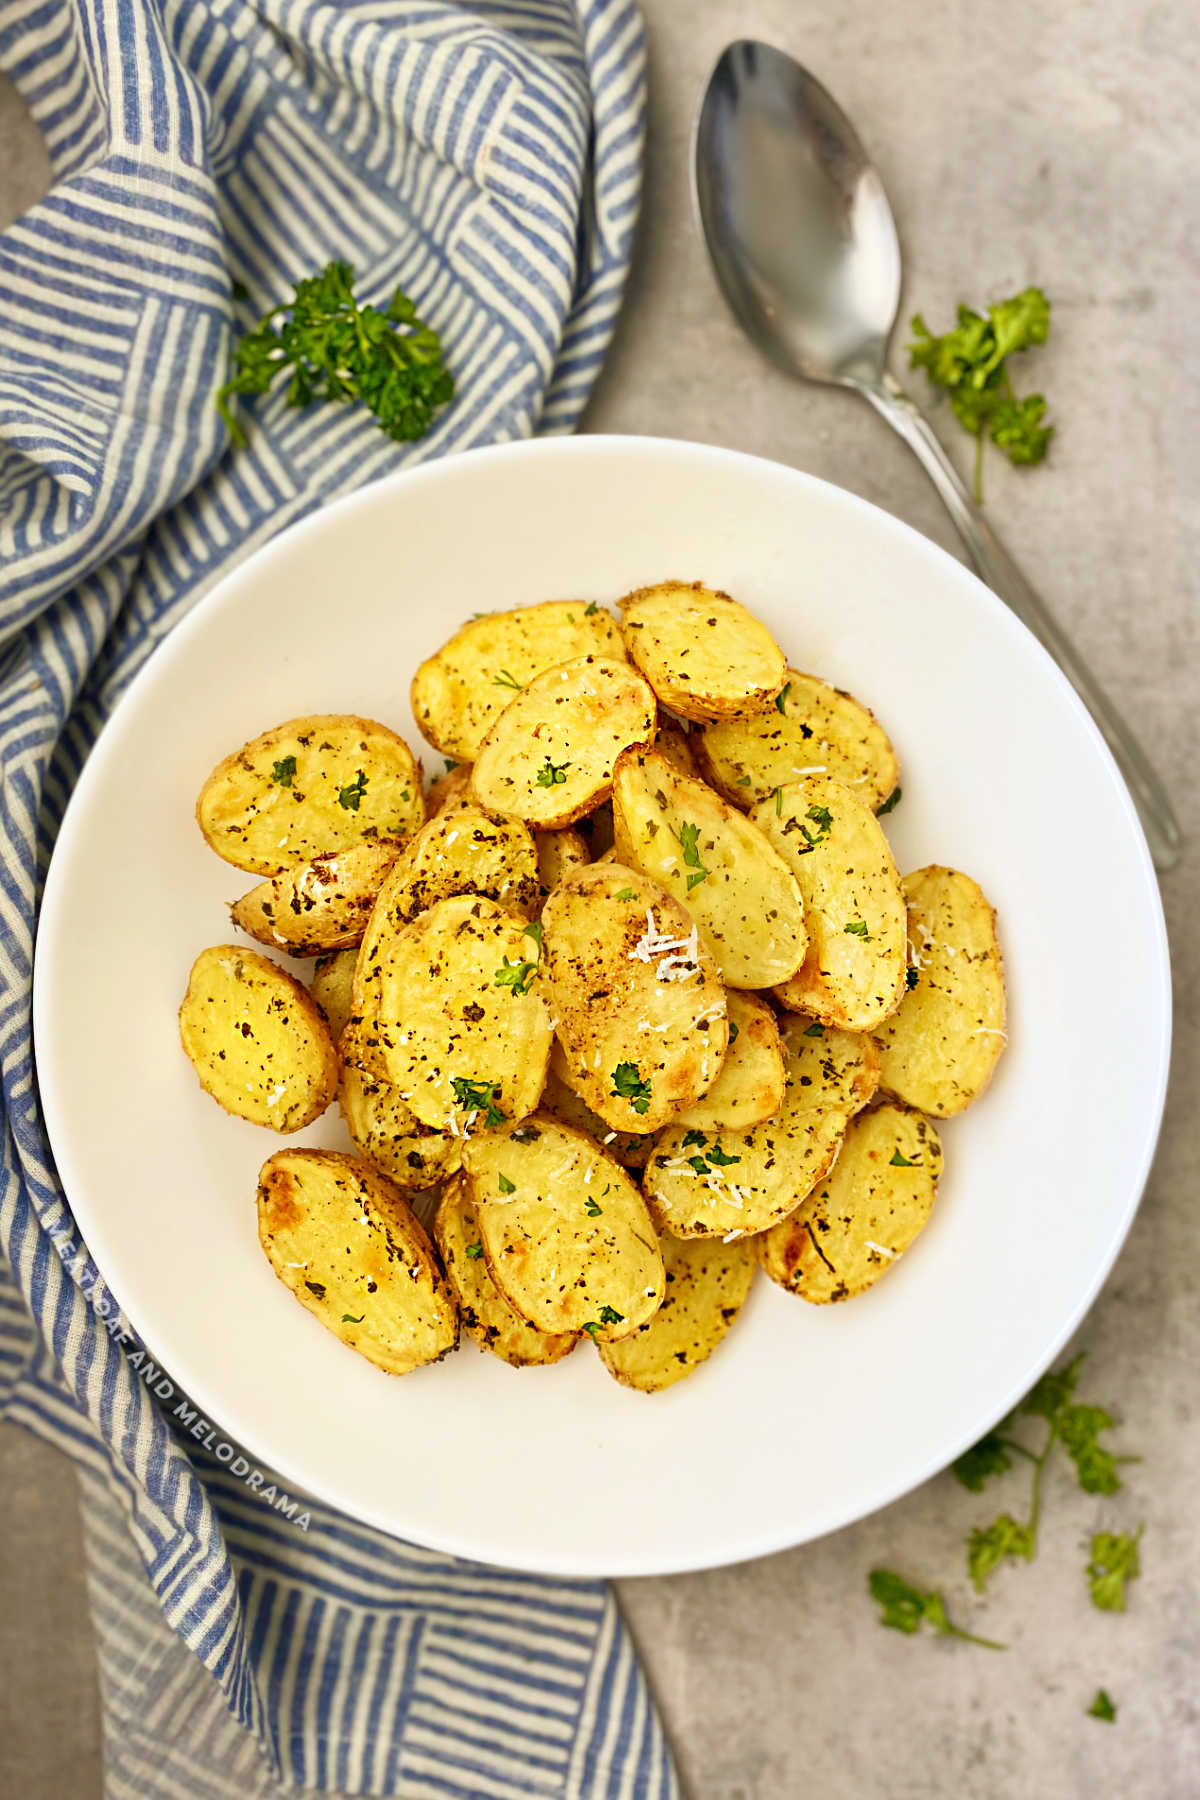 Shredded Idaho® Potatoes with Pepper and Chiles